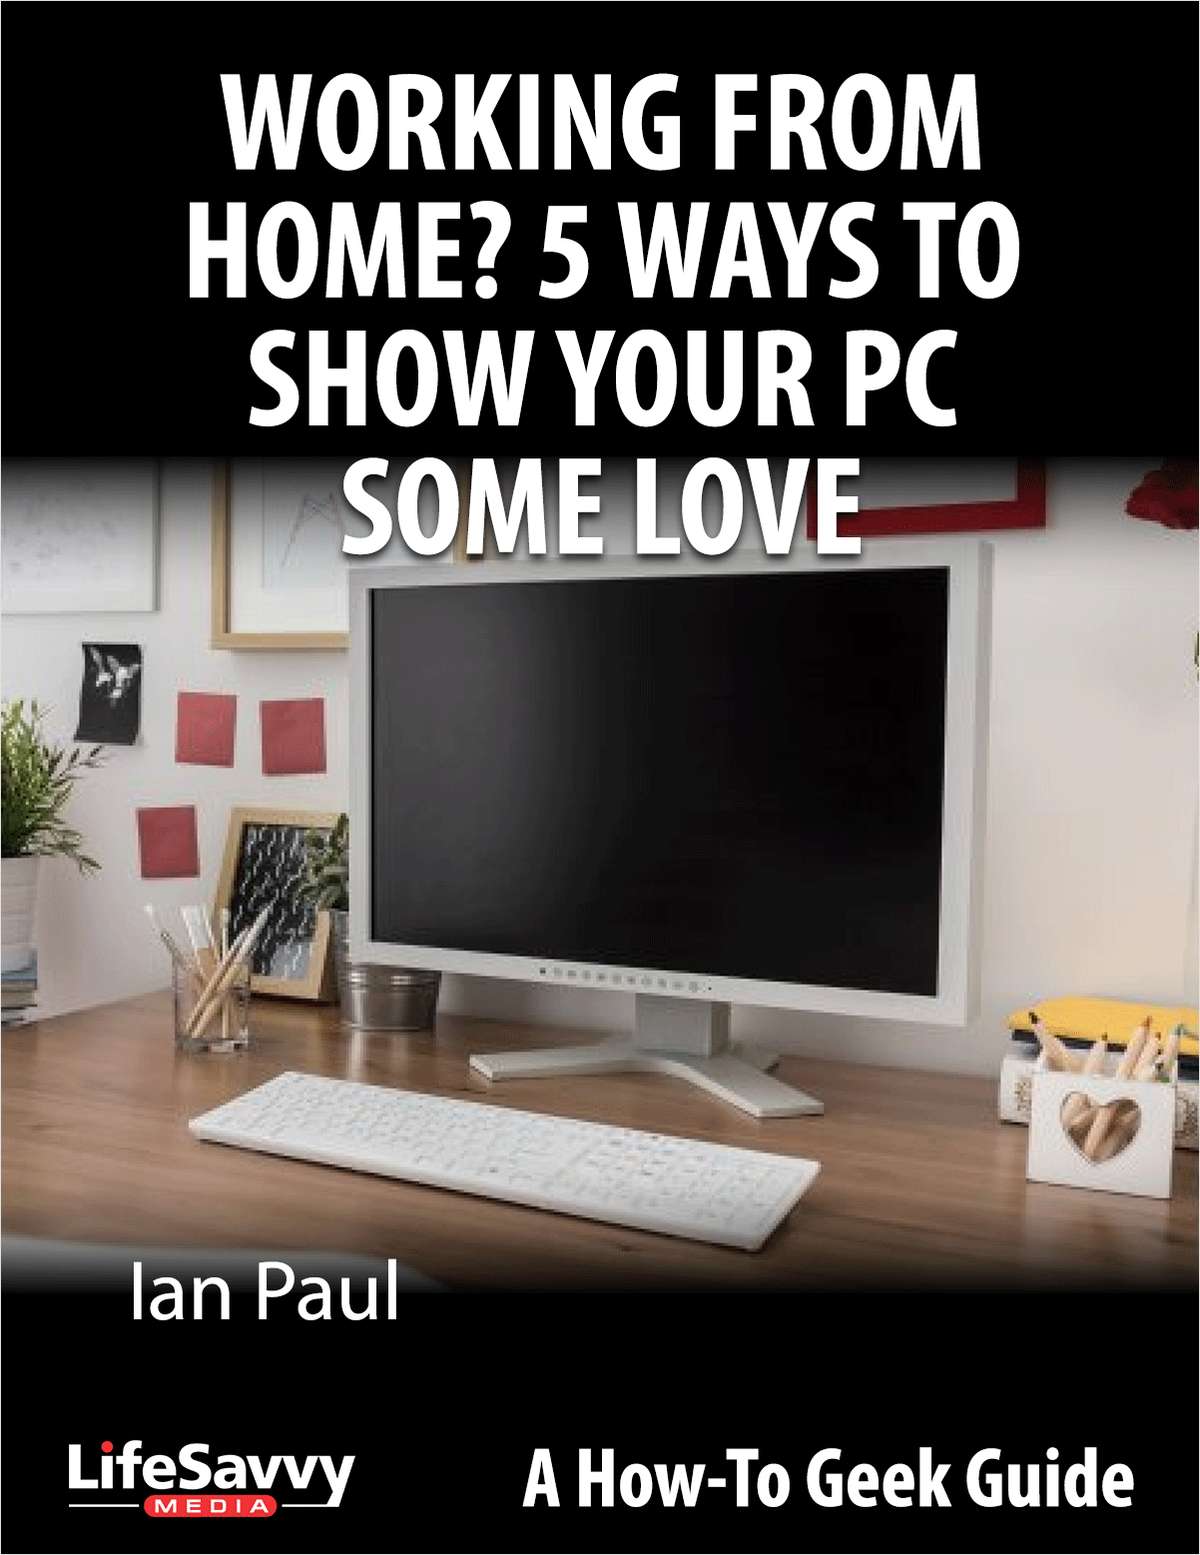 Working From Home? 5 Ways to Show Your PC Some Love